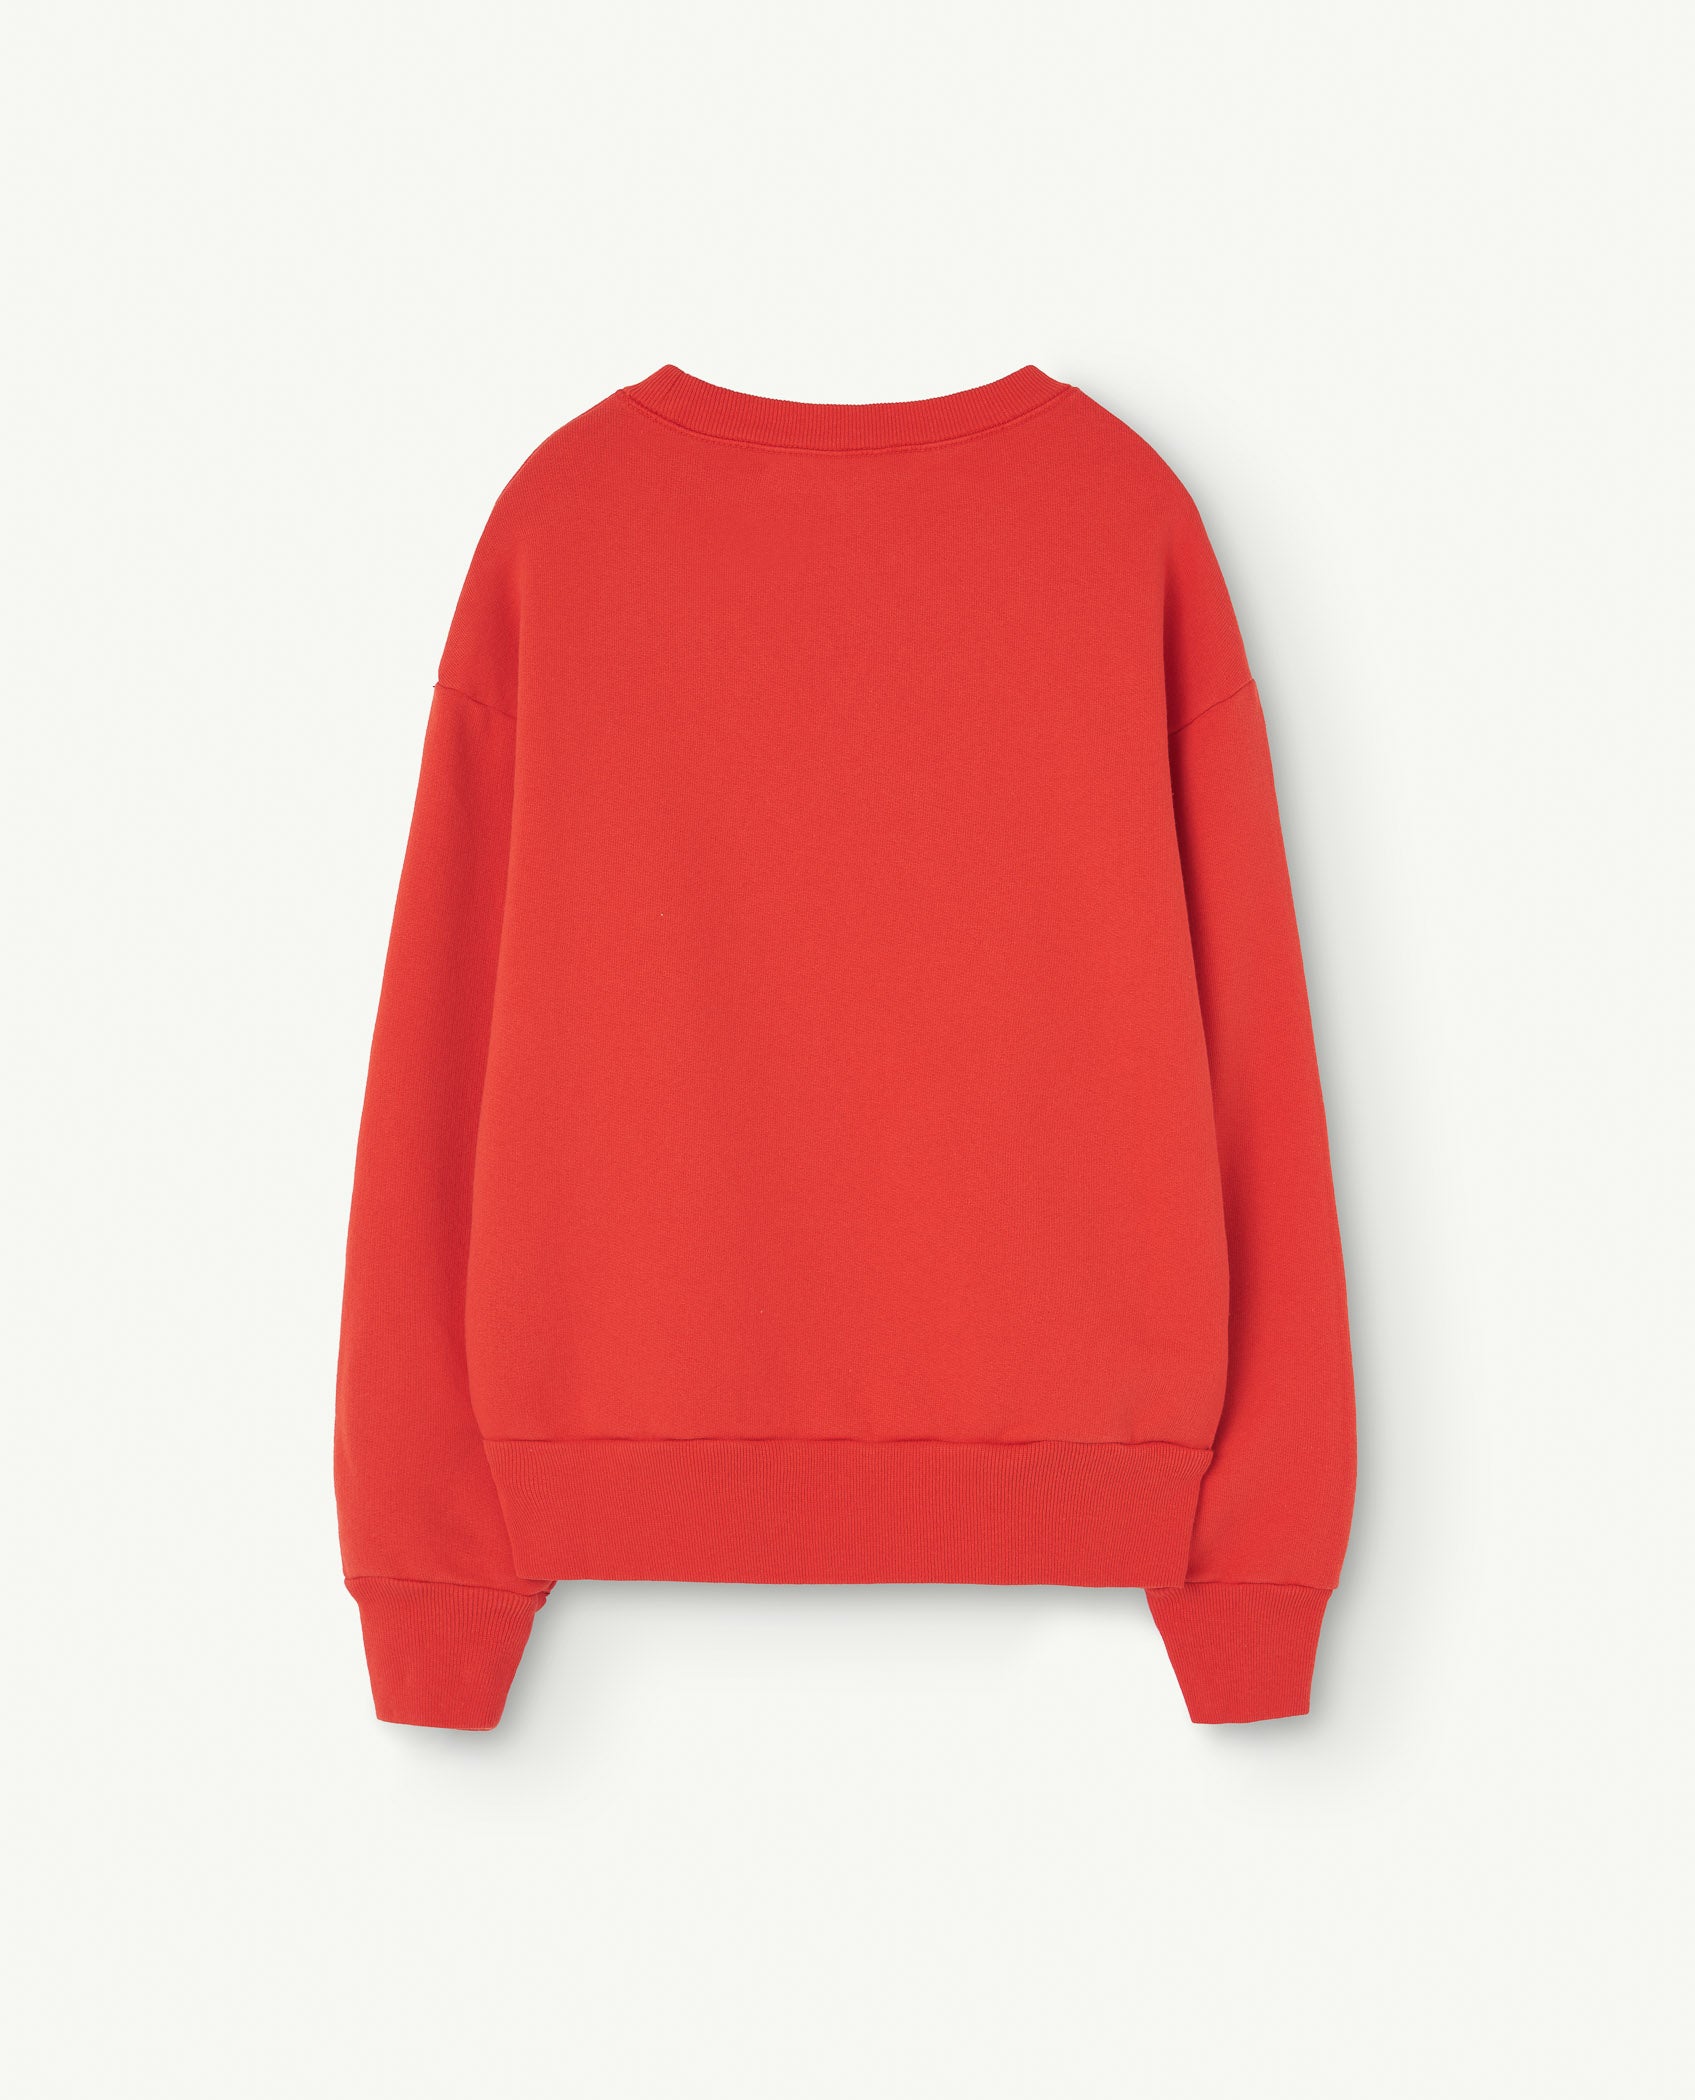 The animals observatory - Bear kids sweater - red